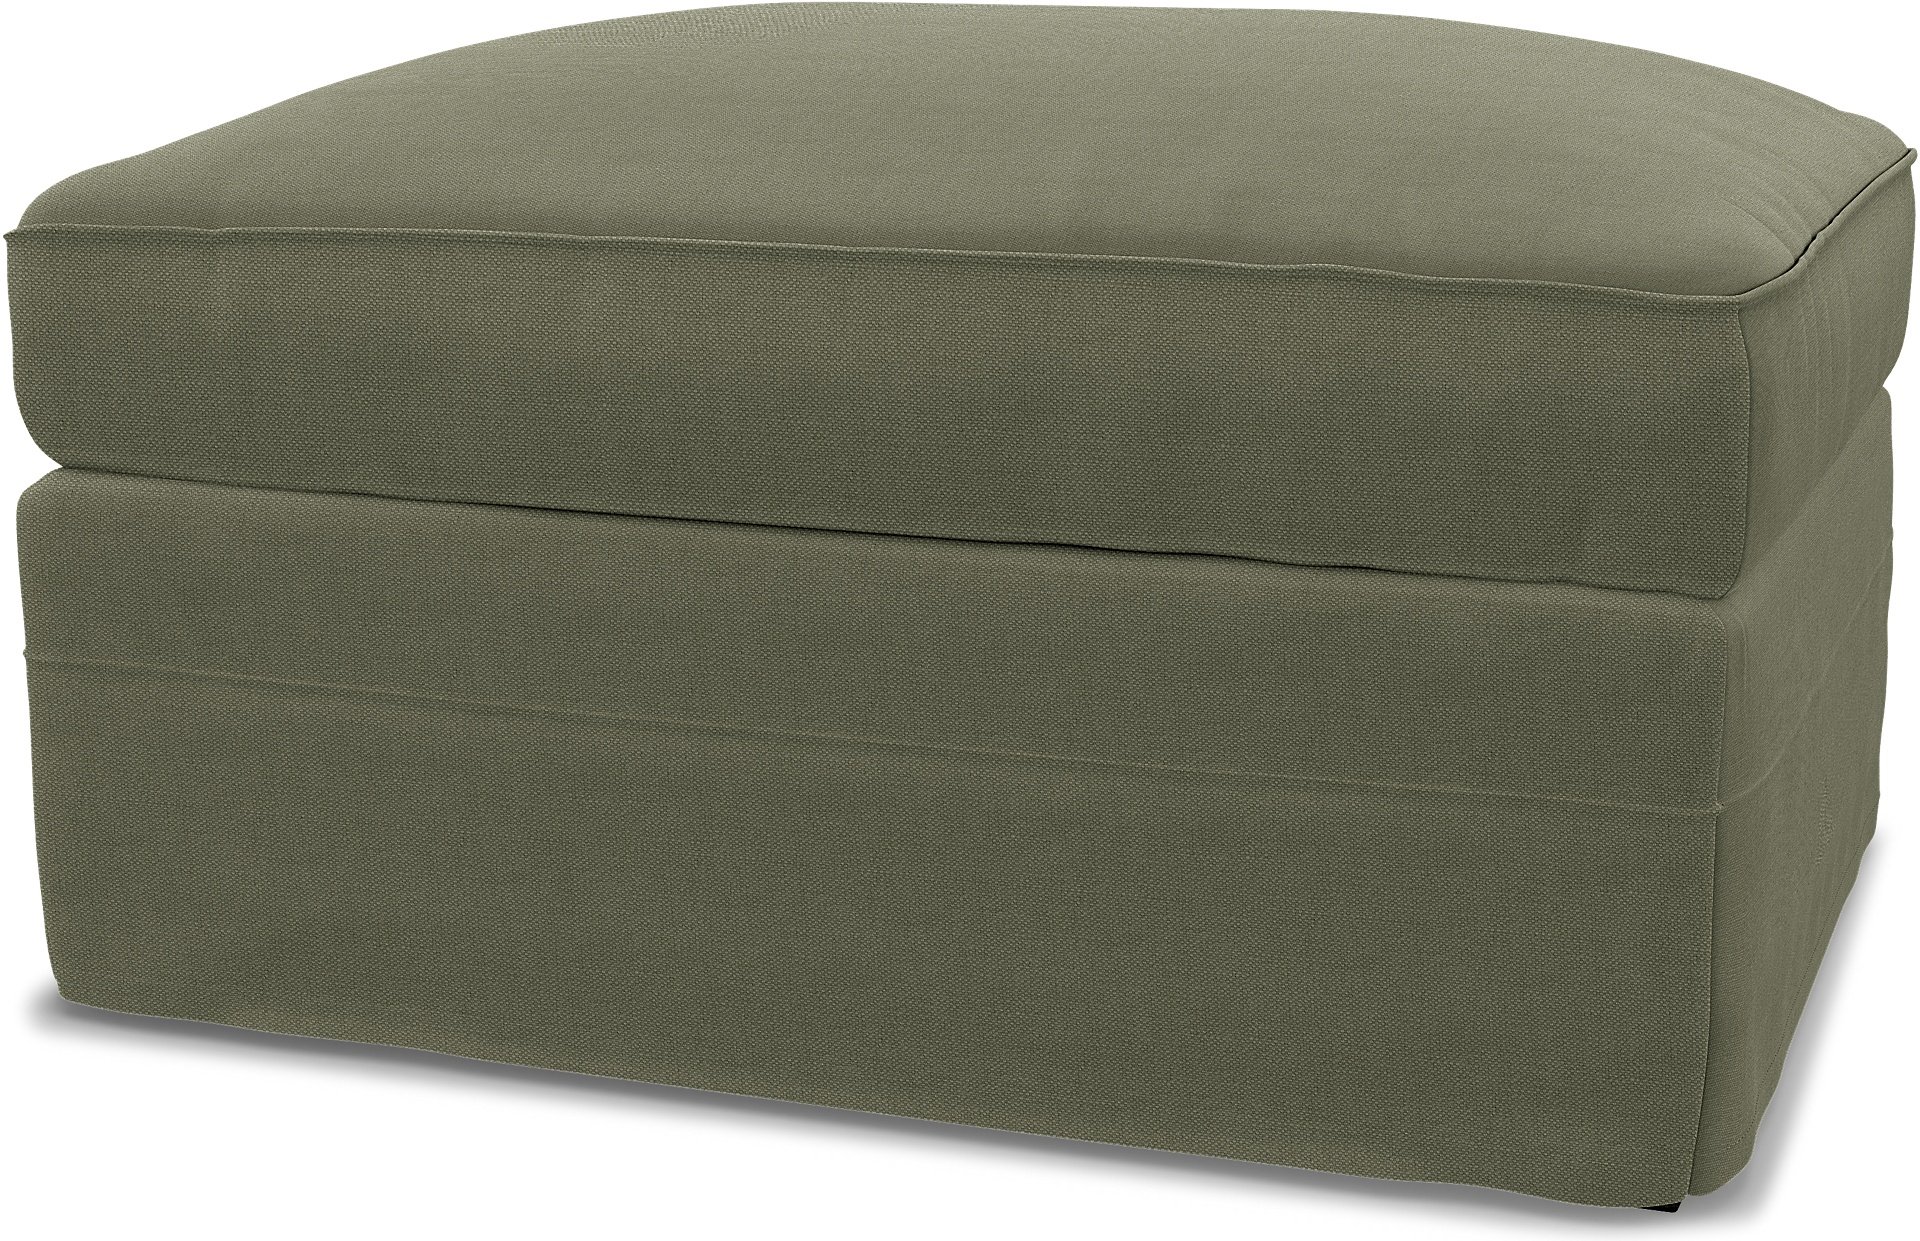 IKEA - Gronlid Footstool with Storage Cover, Sage, Linen - Bemz